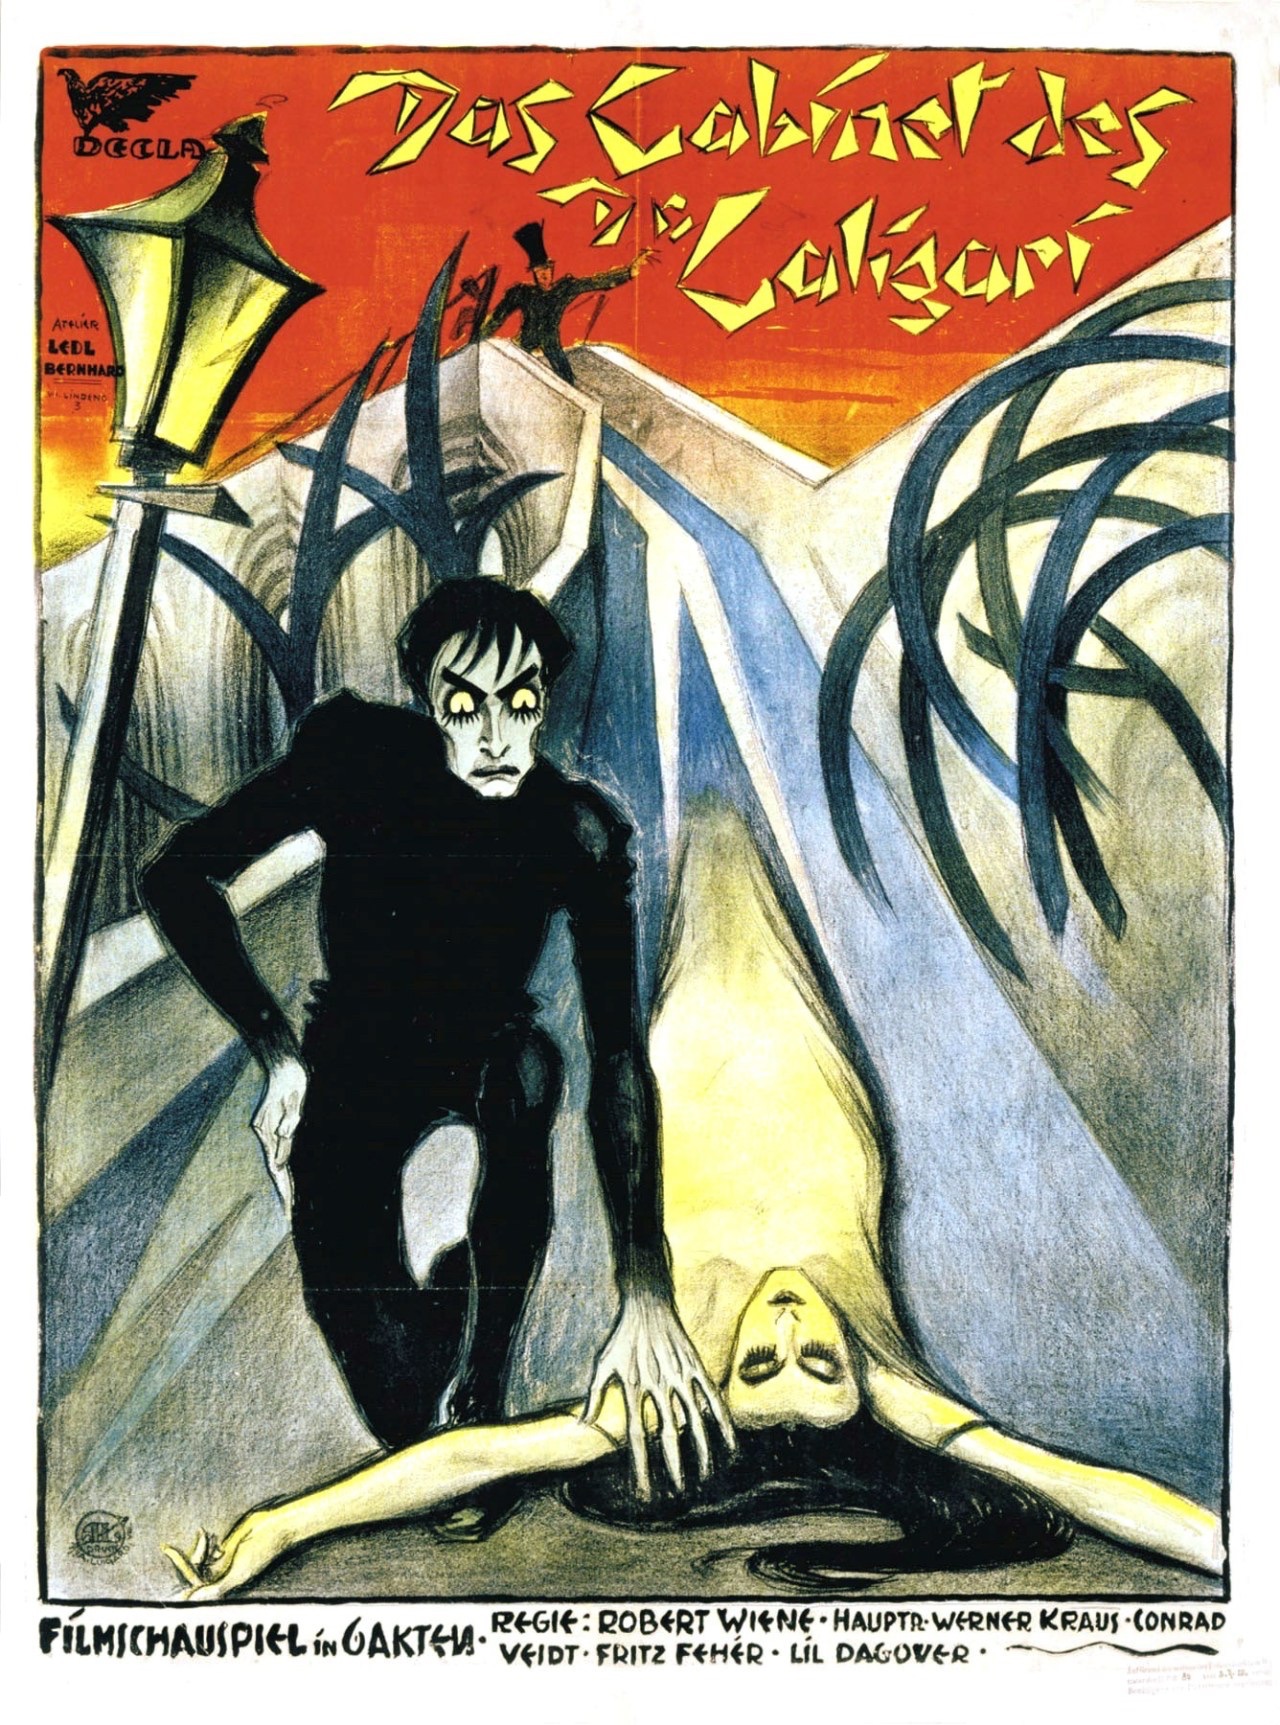 Special Anniversary Screening - The Cabinet of Dr. Caligari